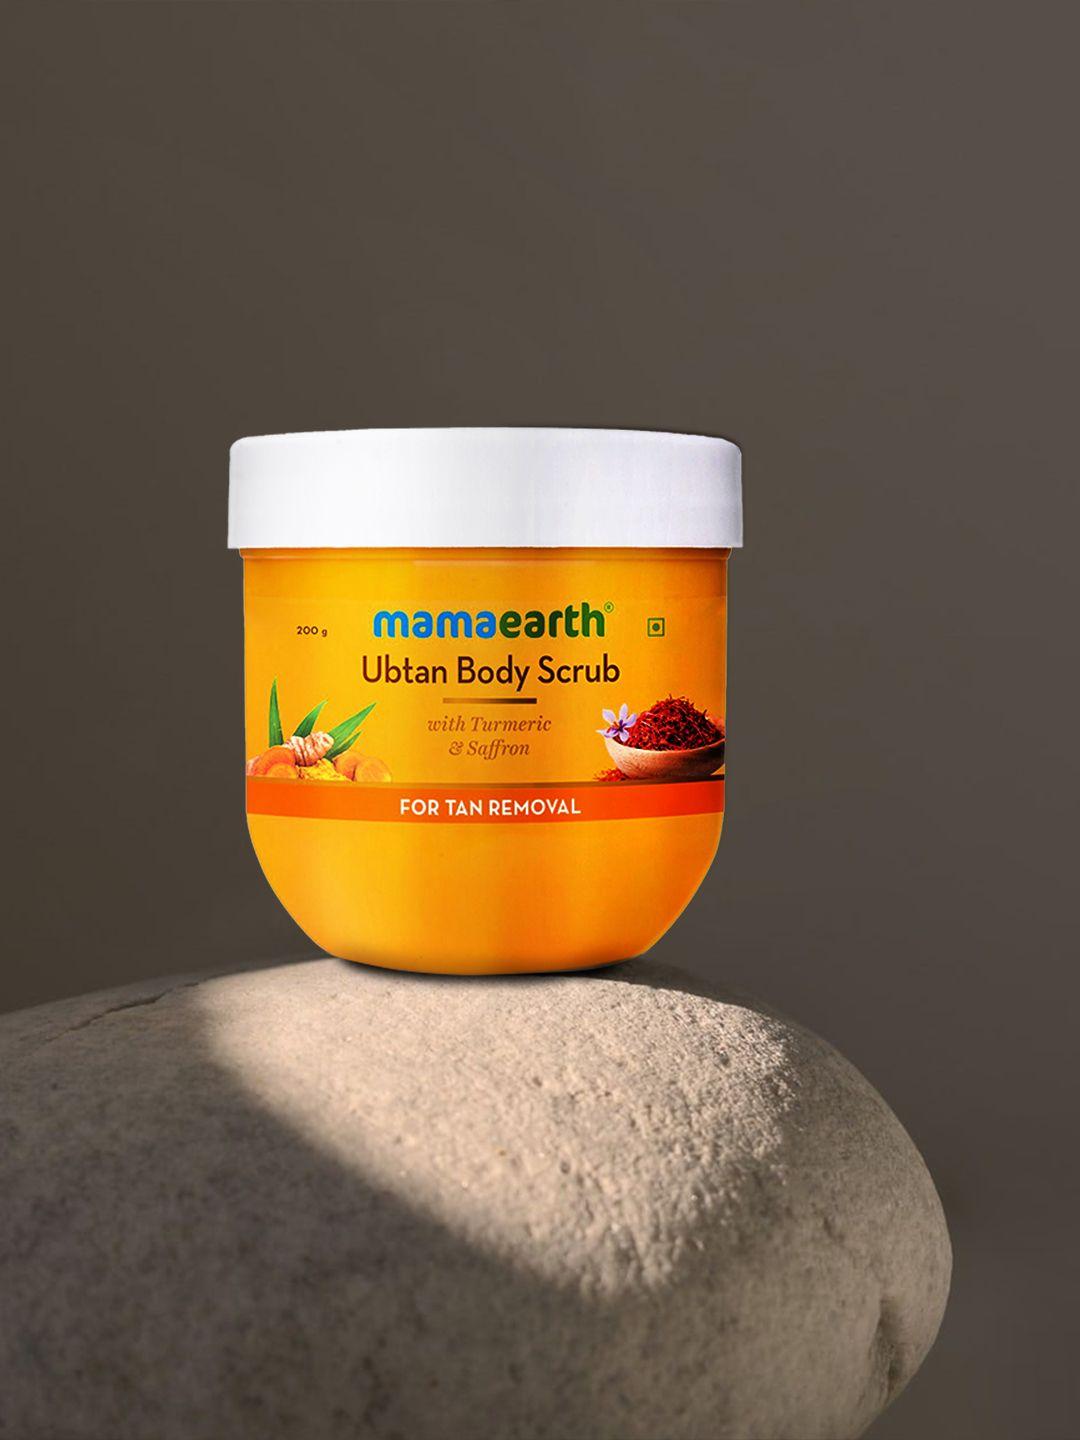 mamaearth sustainable ubtan body scrub with turmeric & saffron for tan removal 200 g